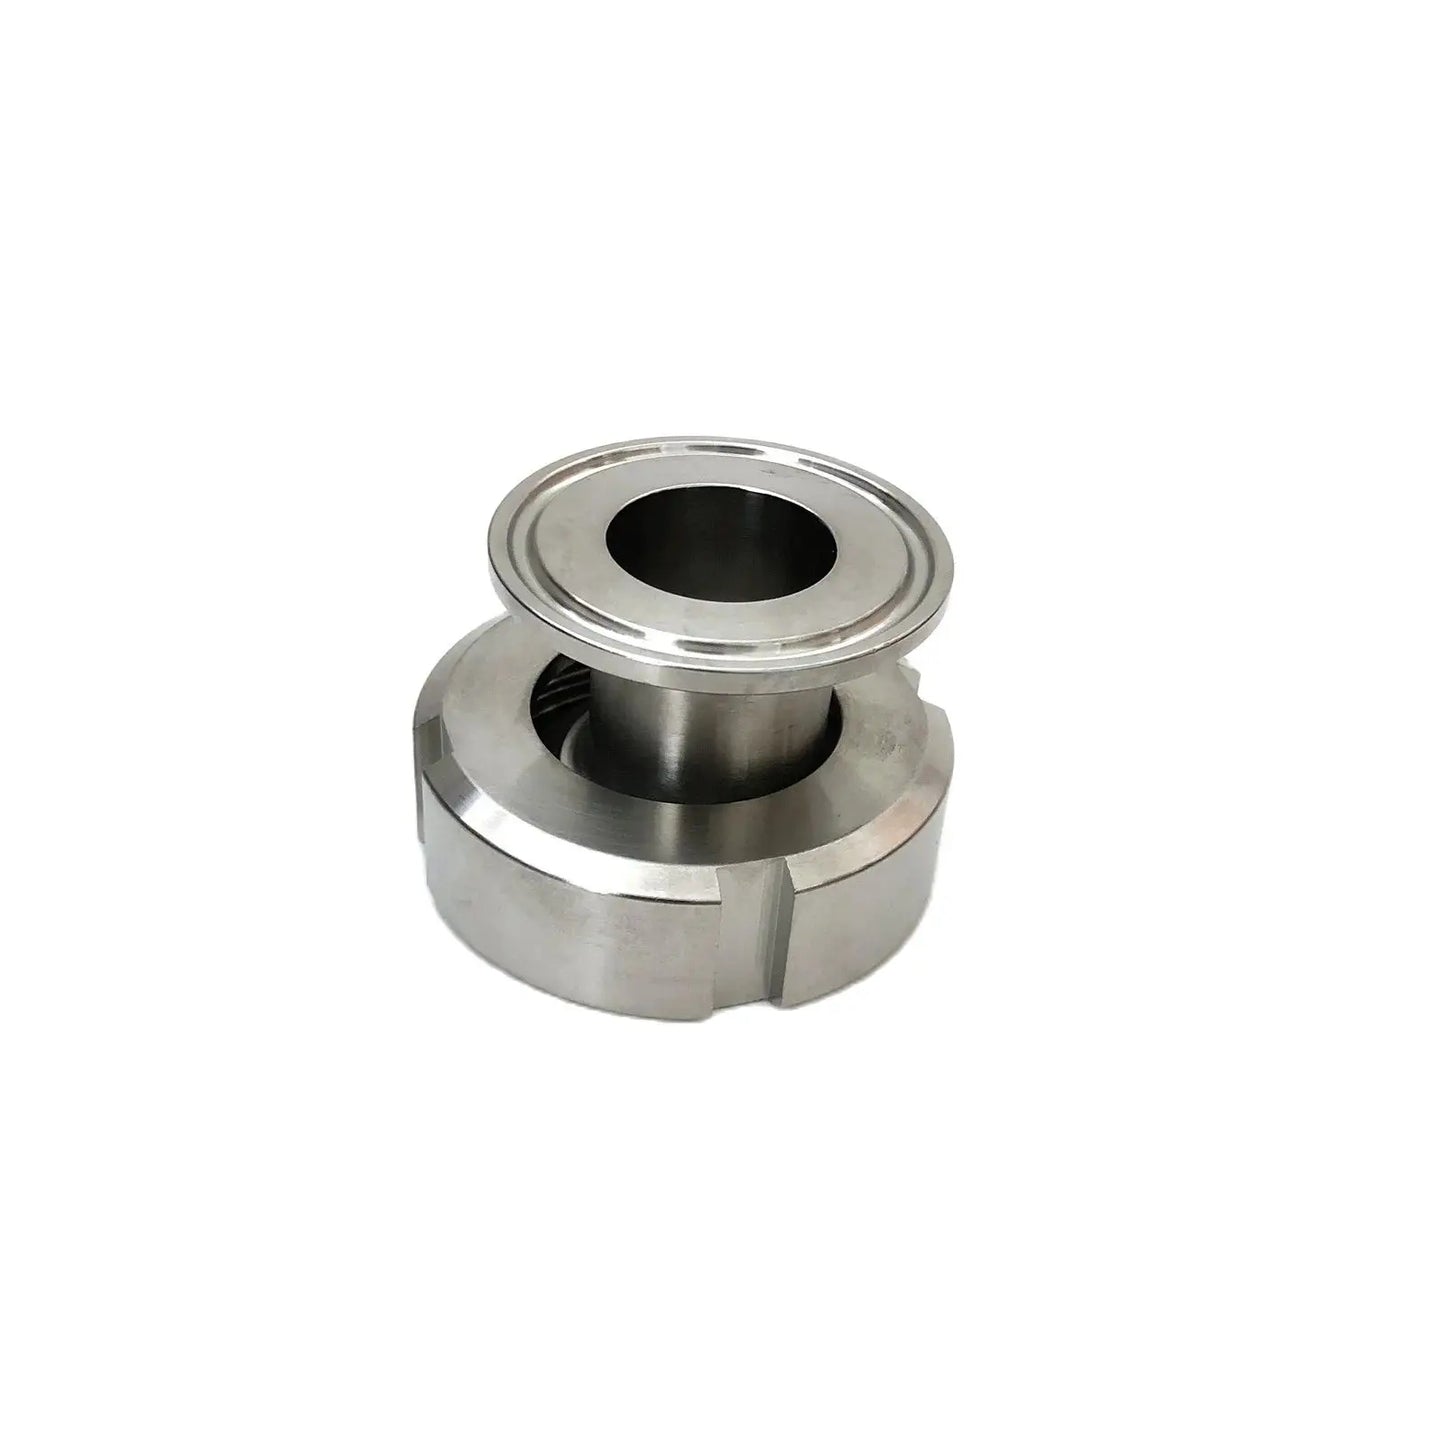 Stainless Steel SS316L Tri Clamp to DIN11851 Sanitary Fitting 1.5" Tri Clamp to Welding Liner & Nut Adapter